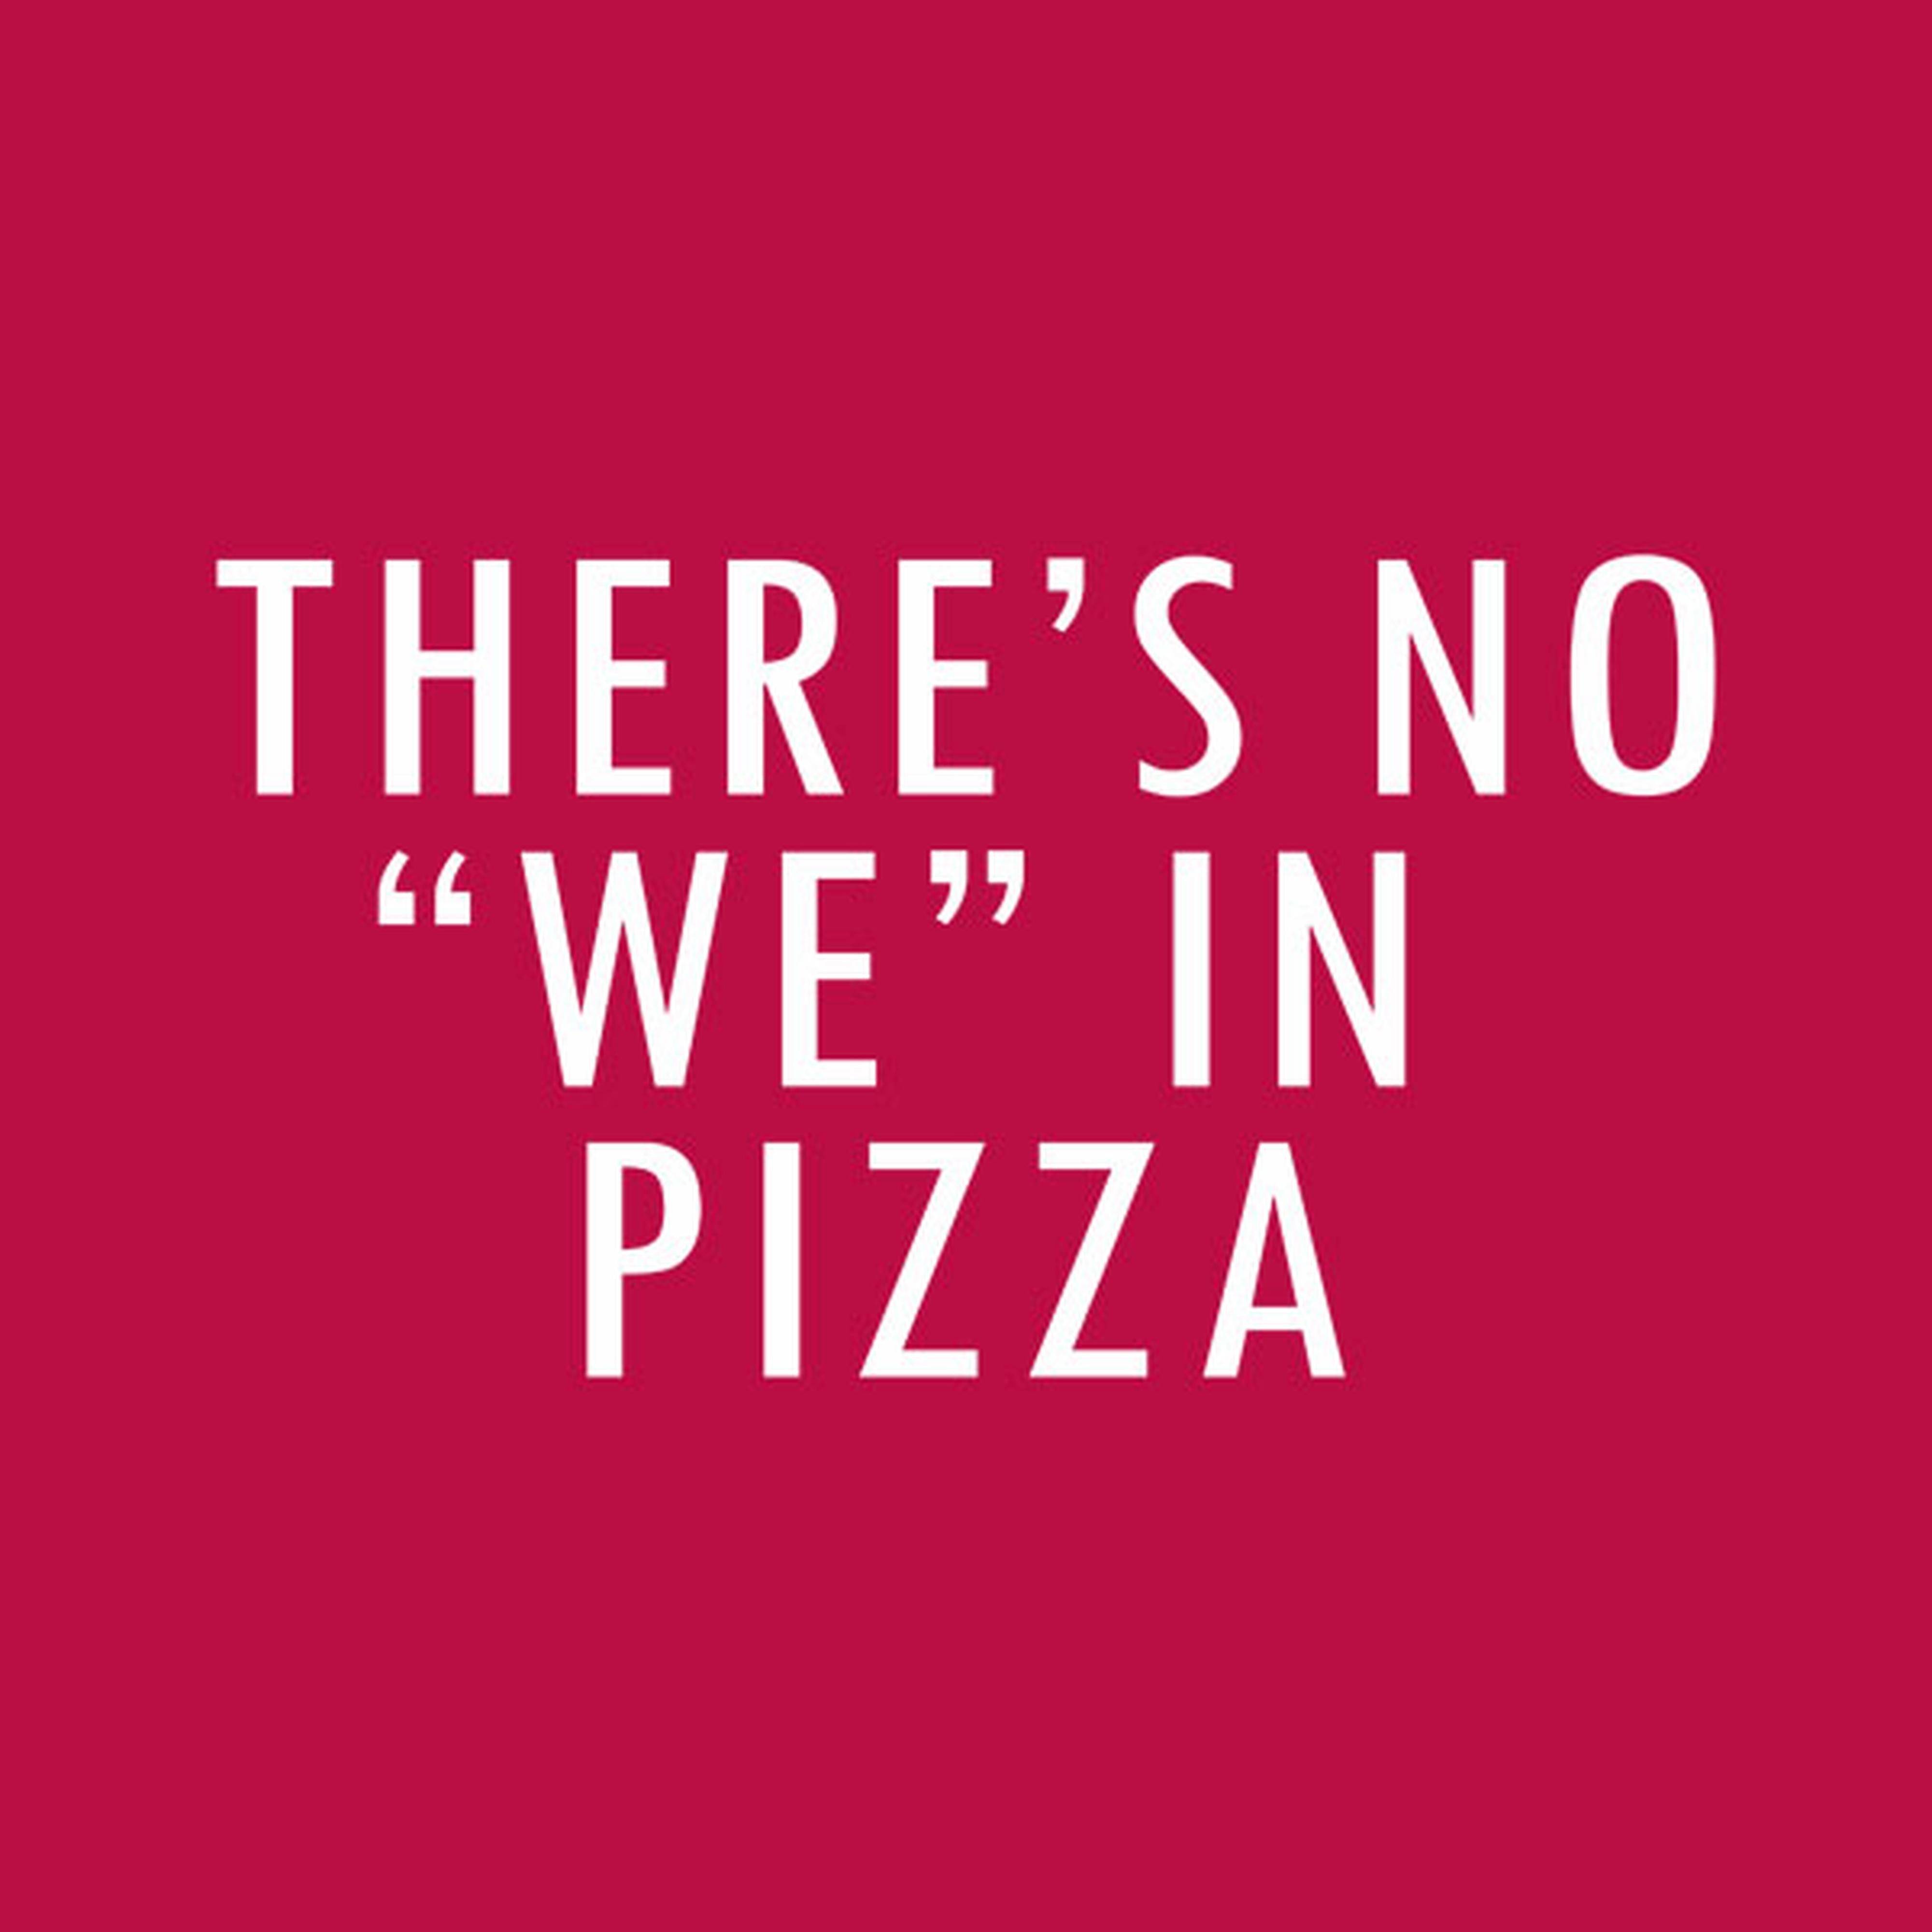 There is no "WE" in pizza - T-shirt